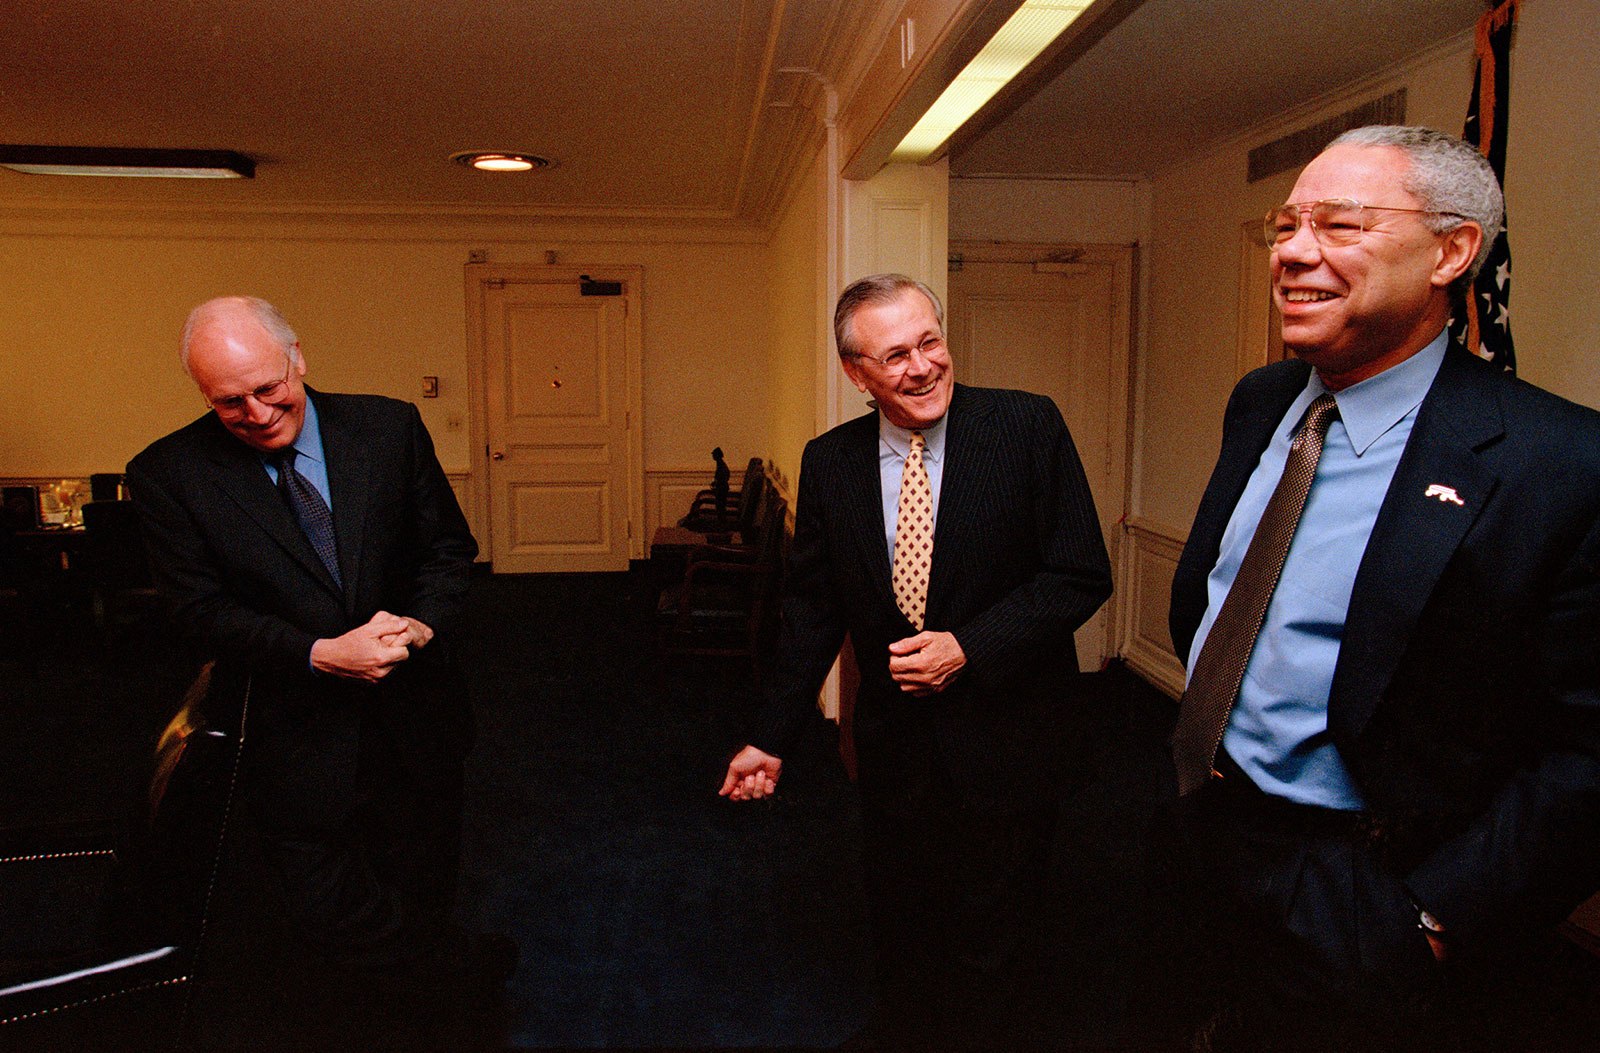 From left, former Vice President Dick Cheney, former Defense Secretary Donald Rumsfeld and former Secretary of State Colin Powell share a laugh in Rumsfeld's office in April 2001.